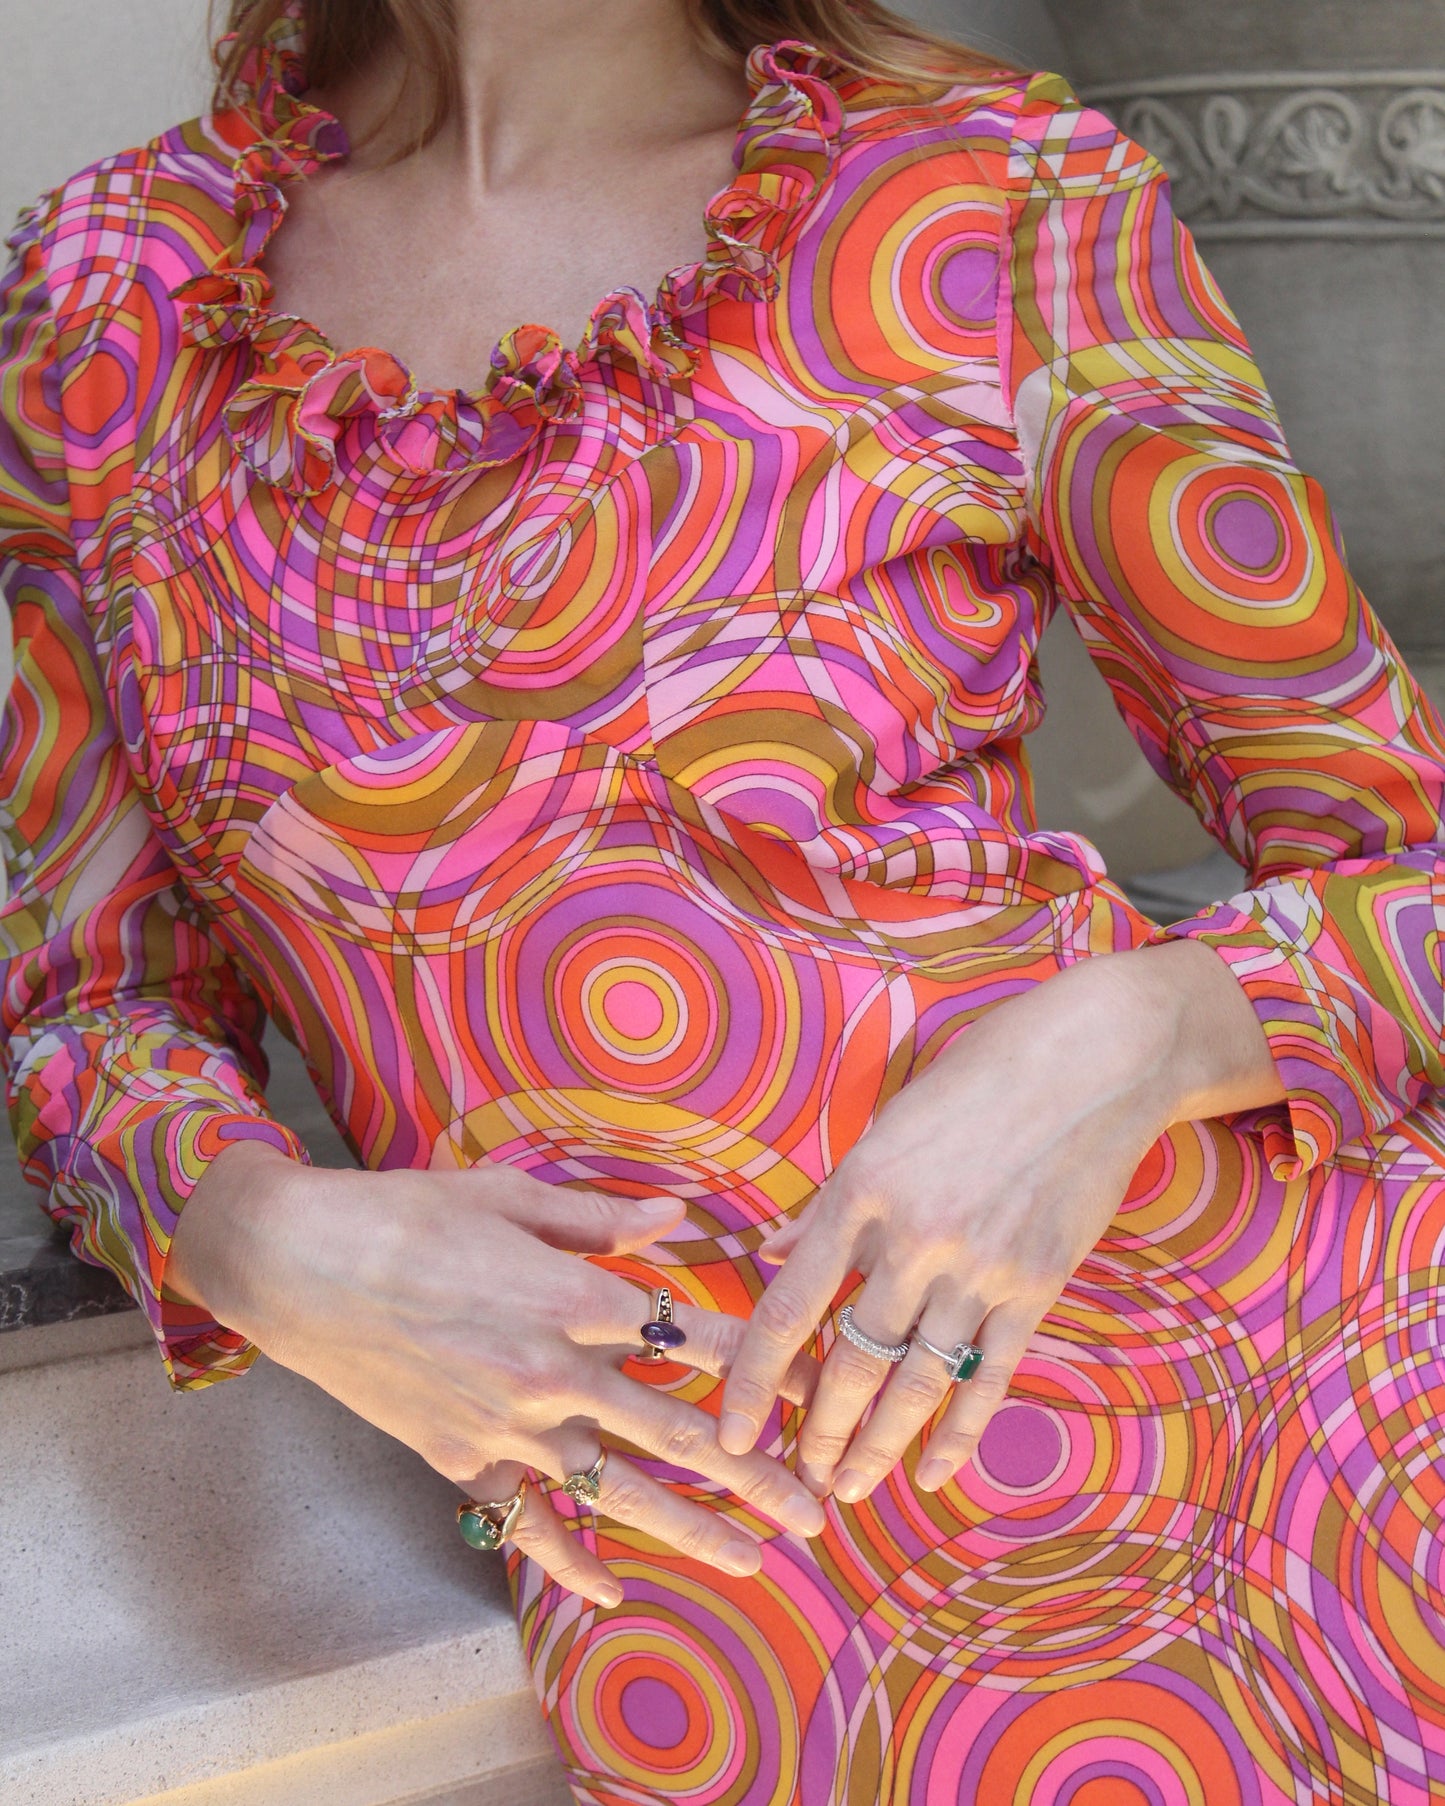 VINTAGE 1960s PSYCHEDELIC MAXIDRESS